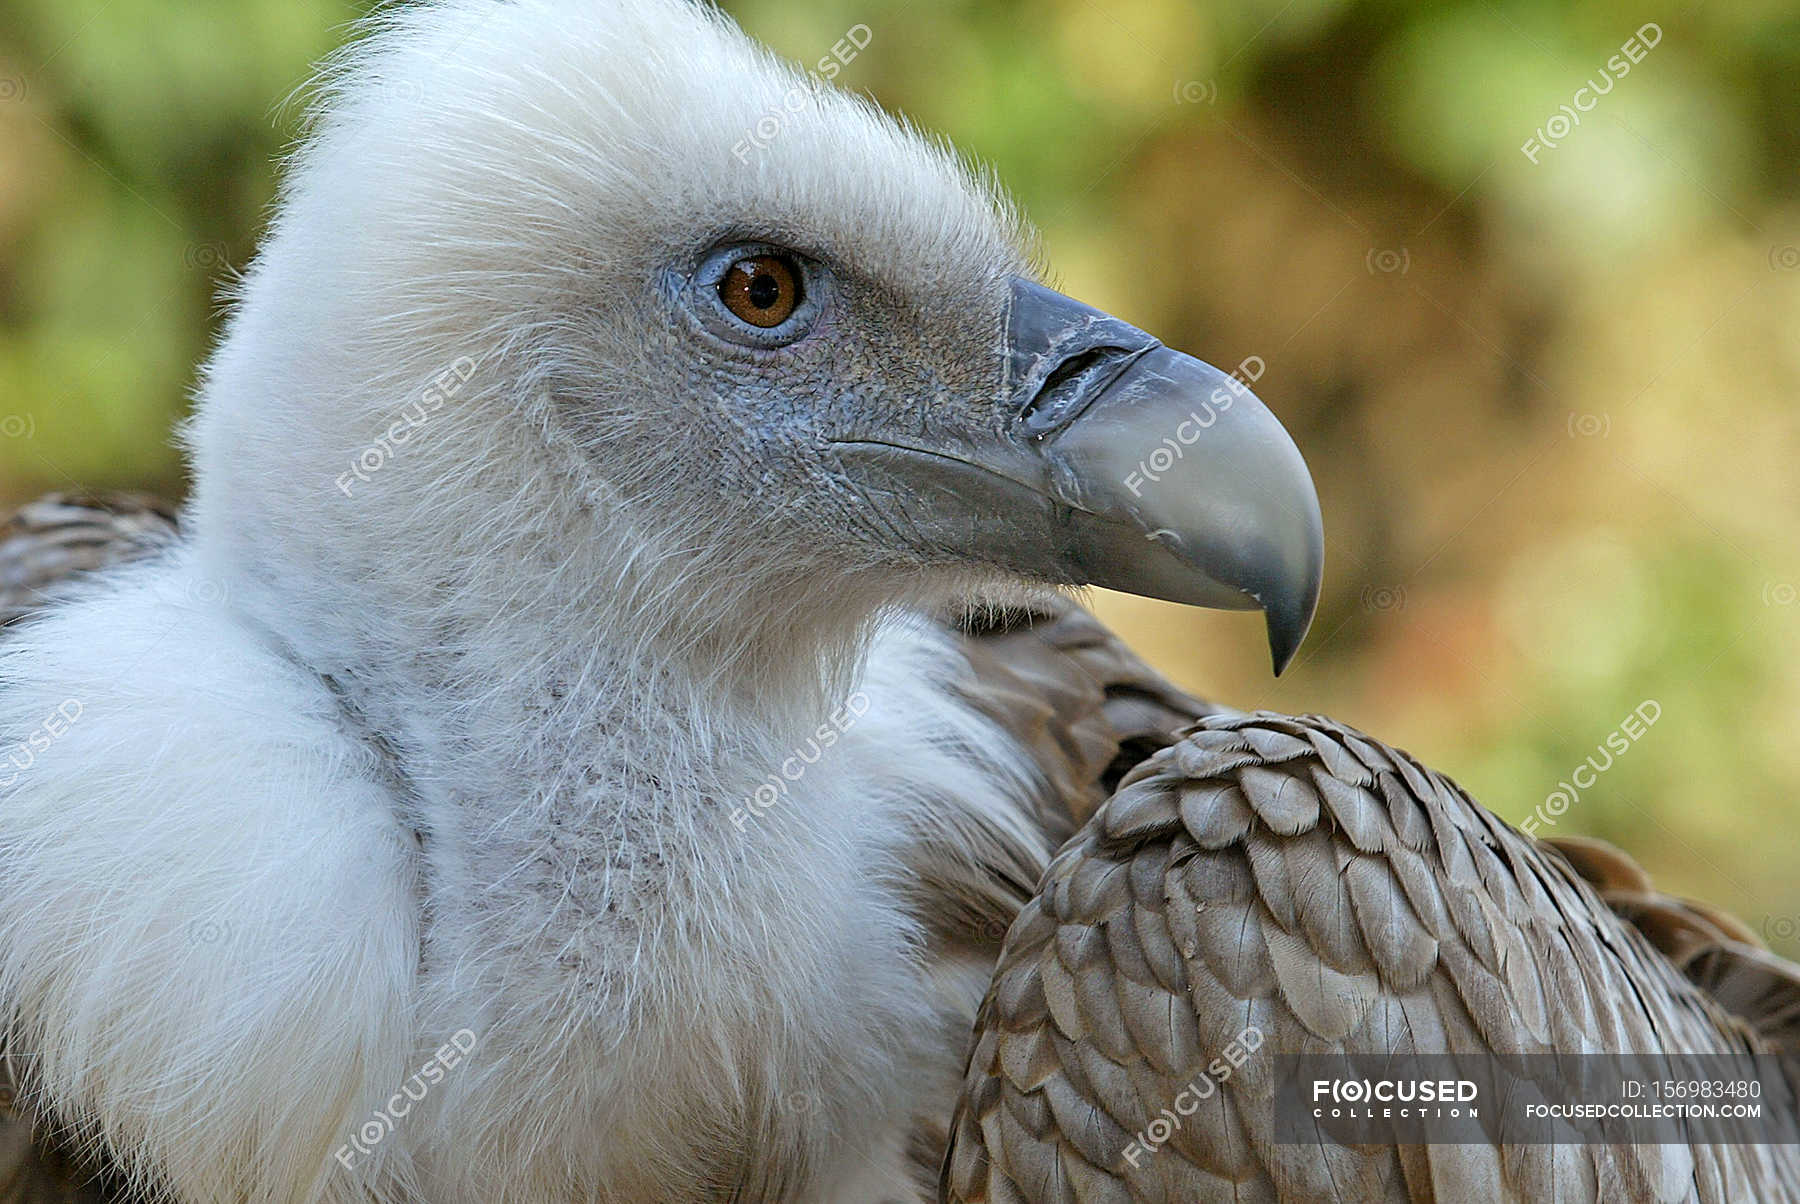 Wild vulture outdoors — Stock Photo | #156983480